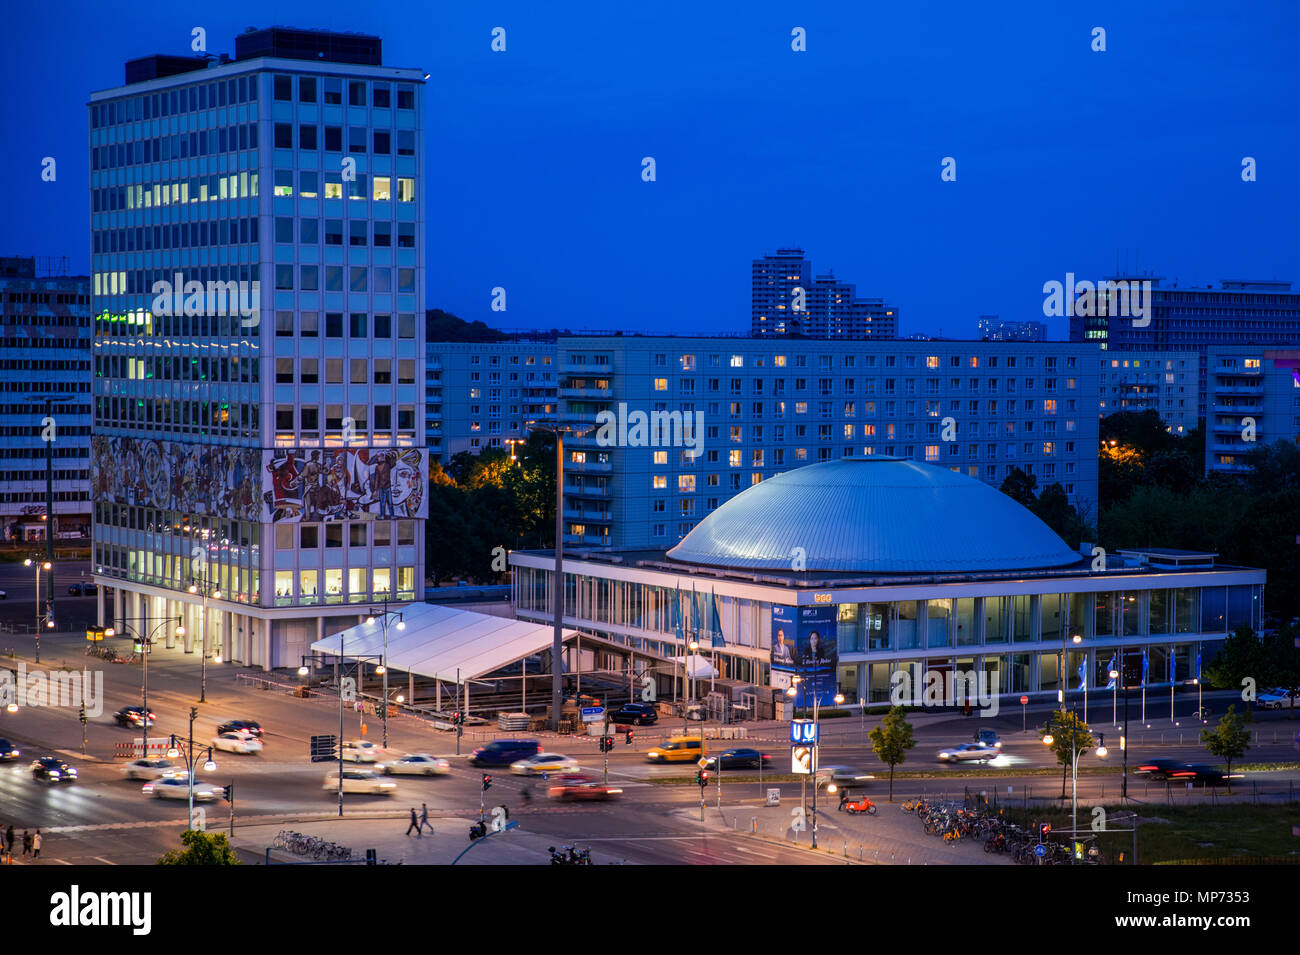 Berlin Congress Center Bcc Haus High Resolution Photography Images - Alamy